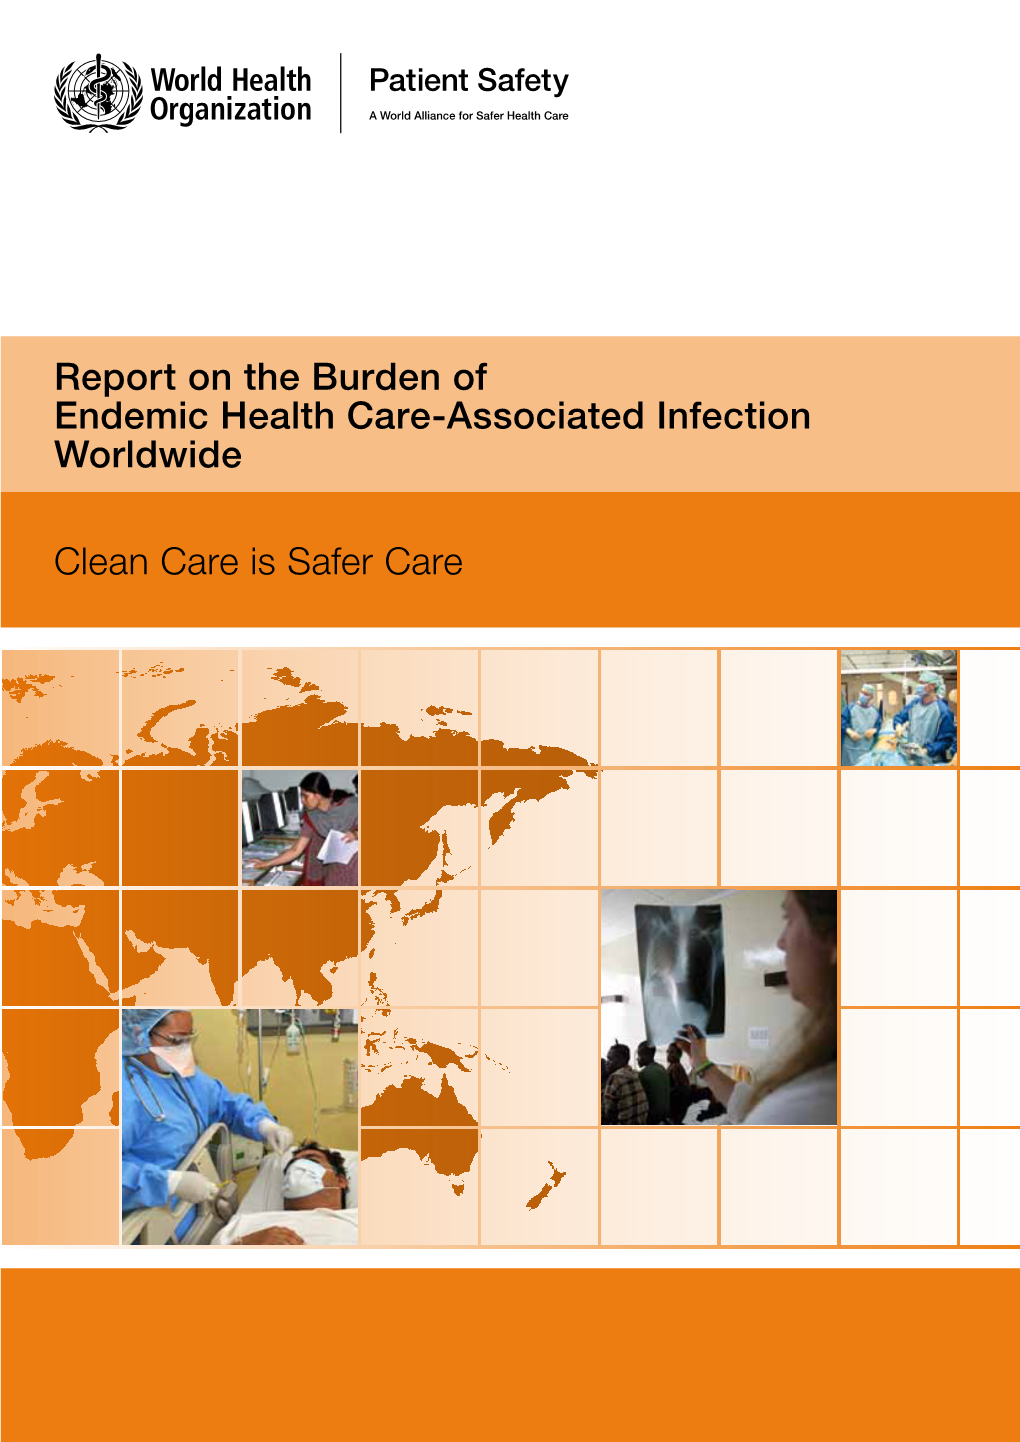 Report on the Burden of Endemic Health Care-Associated Infection Worldwide